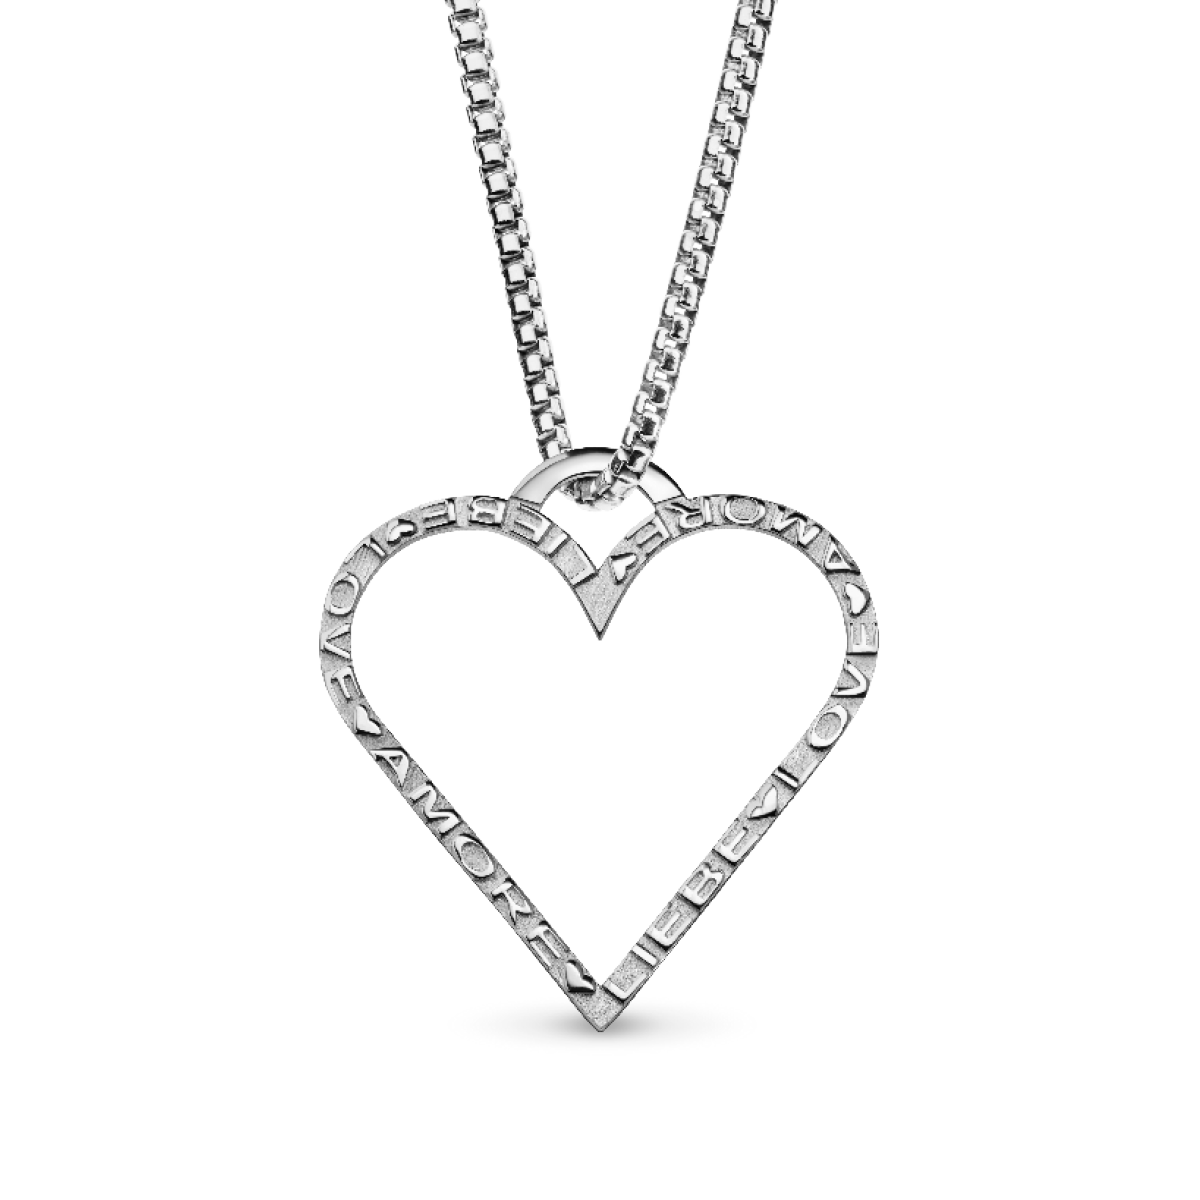 ♥Mother's Day offer gift set necklace with pendant only €199,-  instead of €268,- (Necklace free)♥